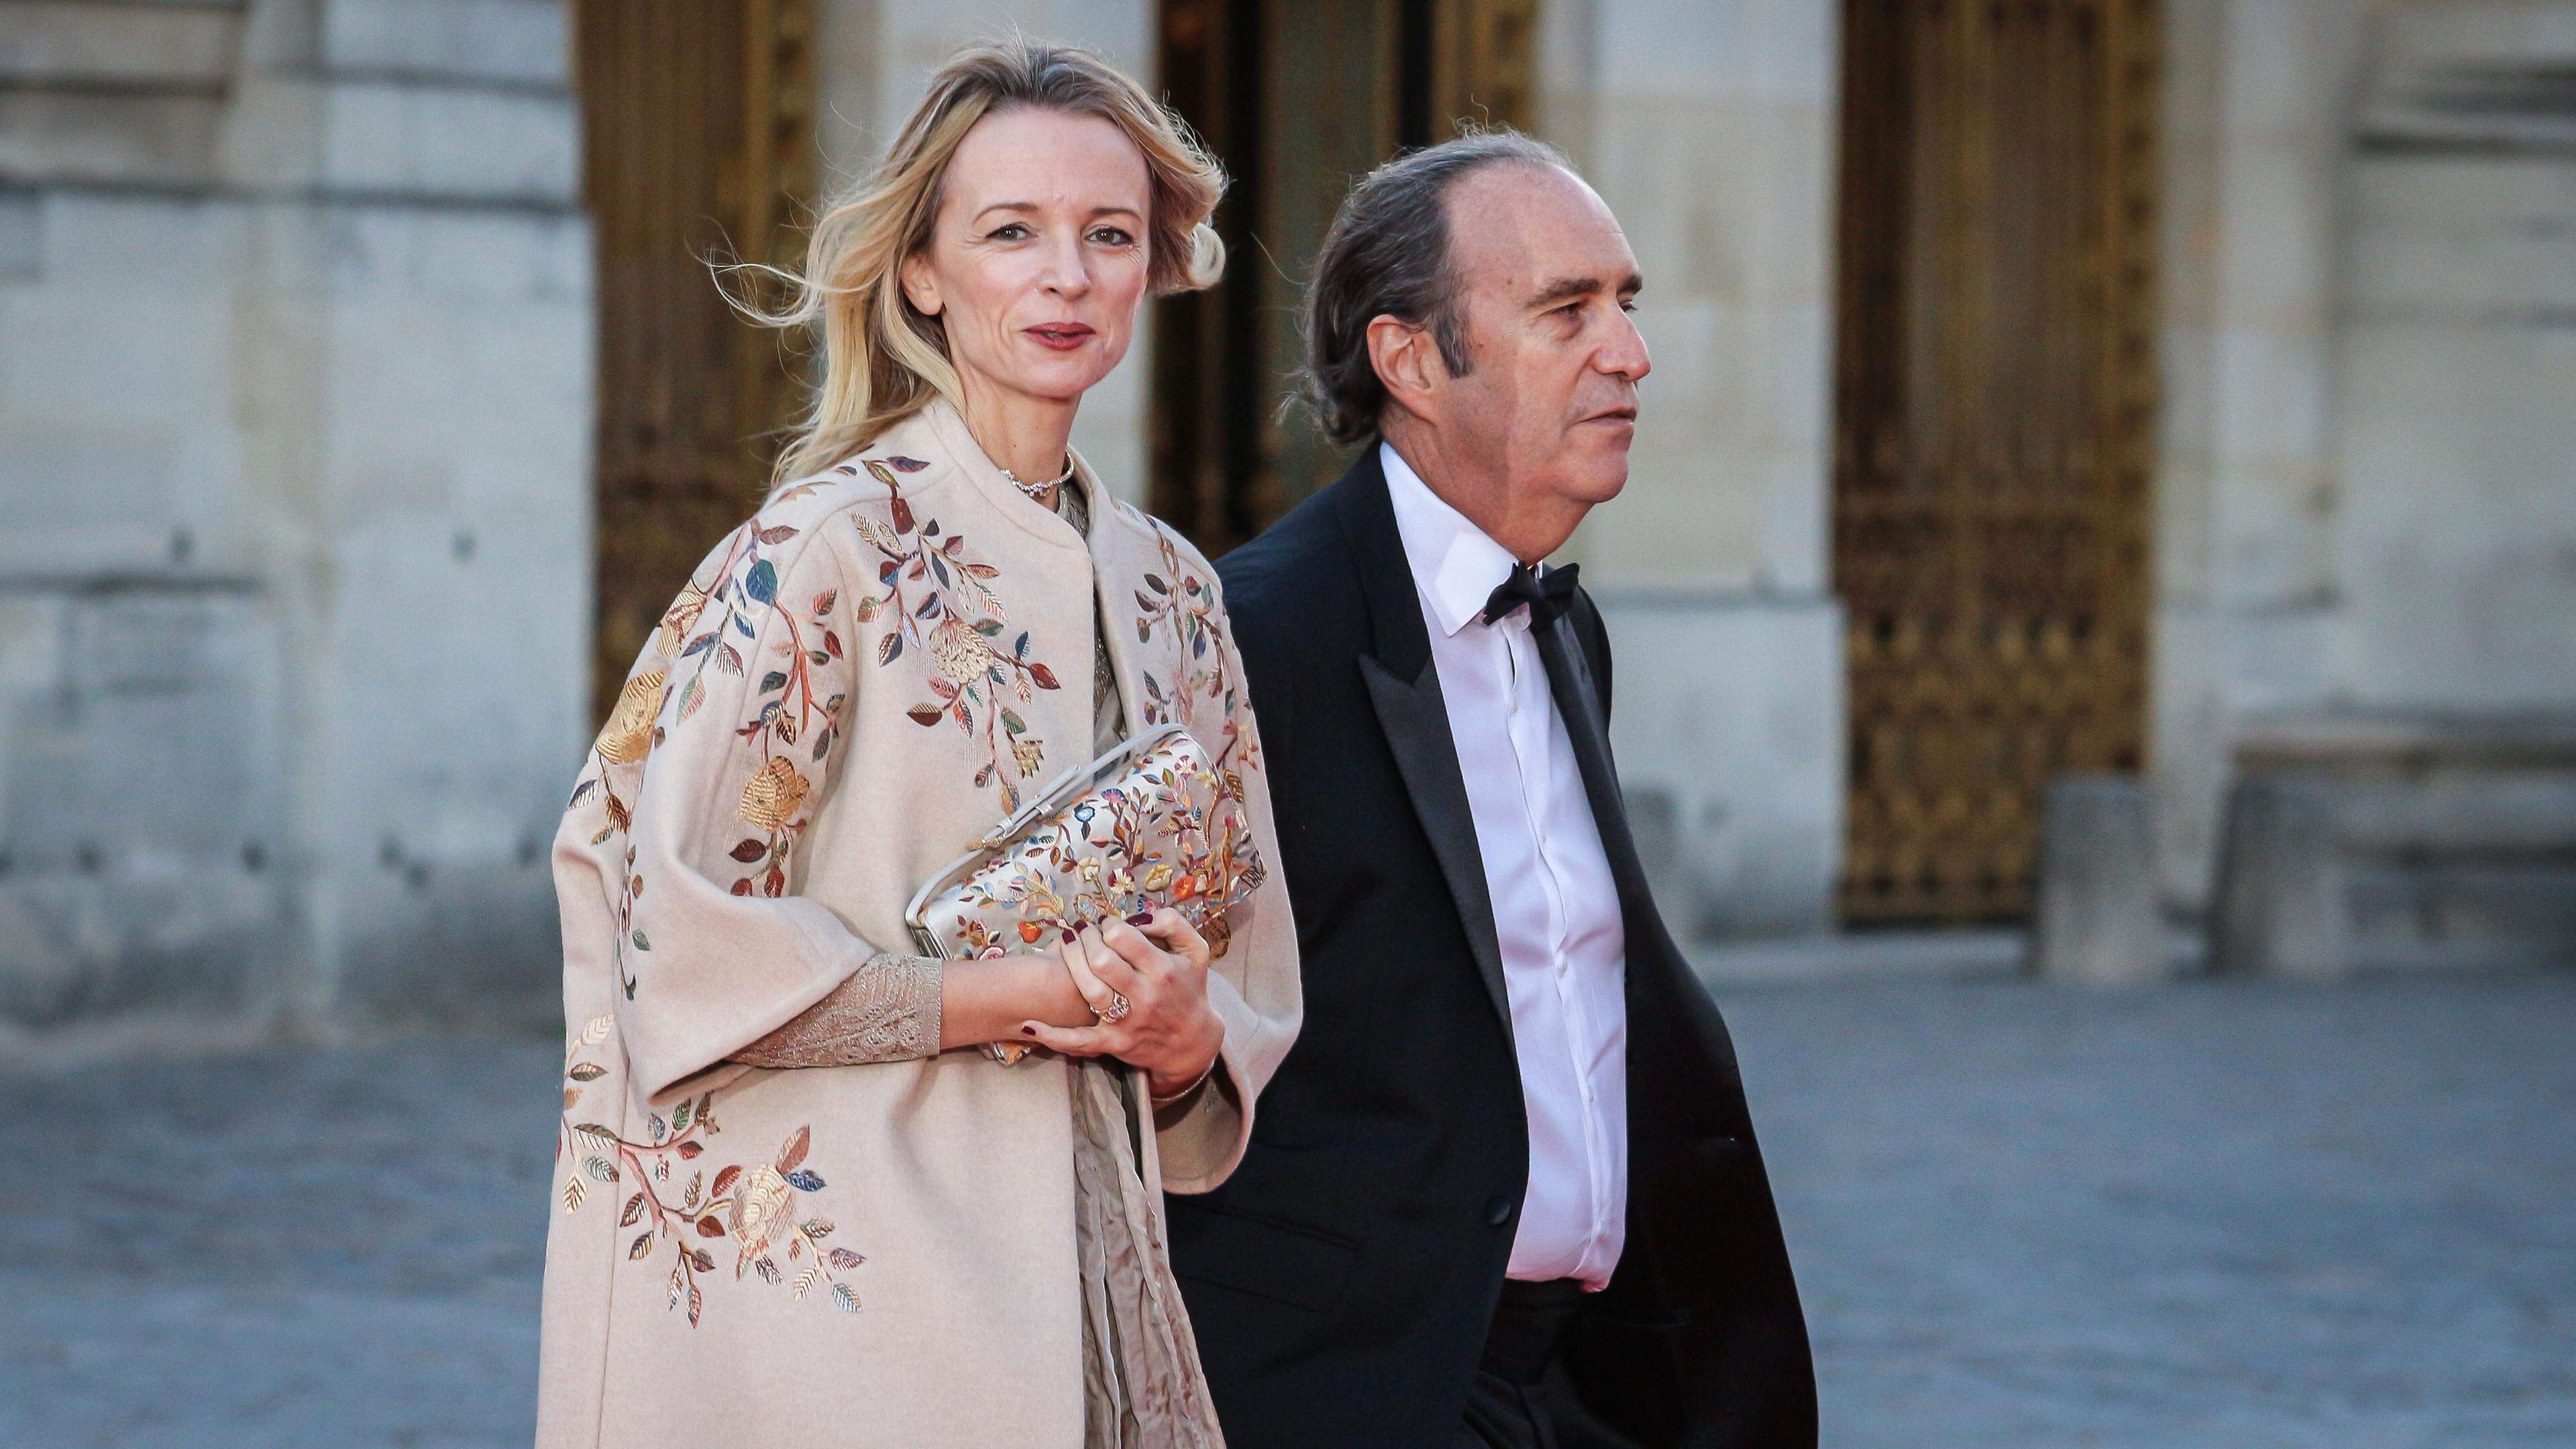 Xavier Niel and partner Delphine Arnault, director and executive vice president at Louis Vuitton, at the Palace of Versailles in September 2023